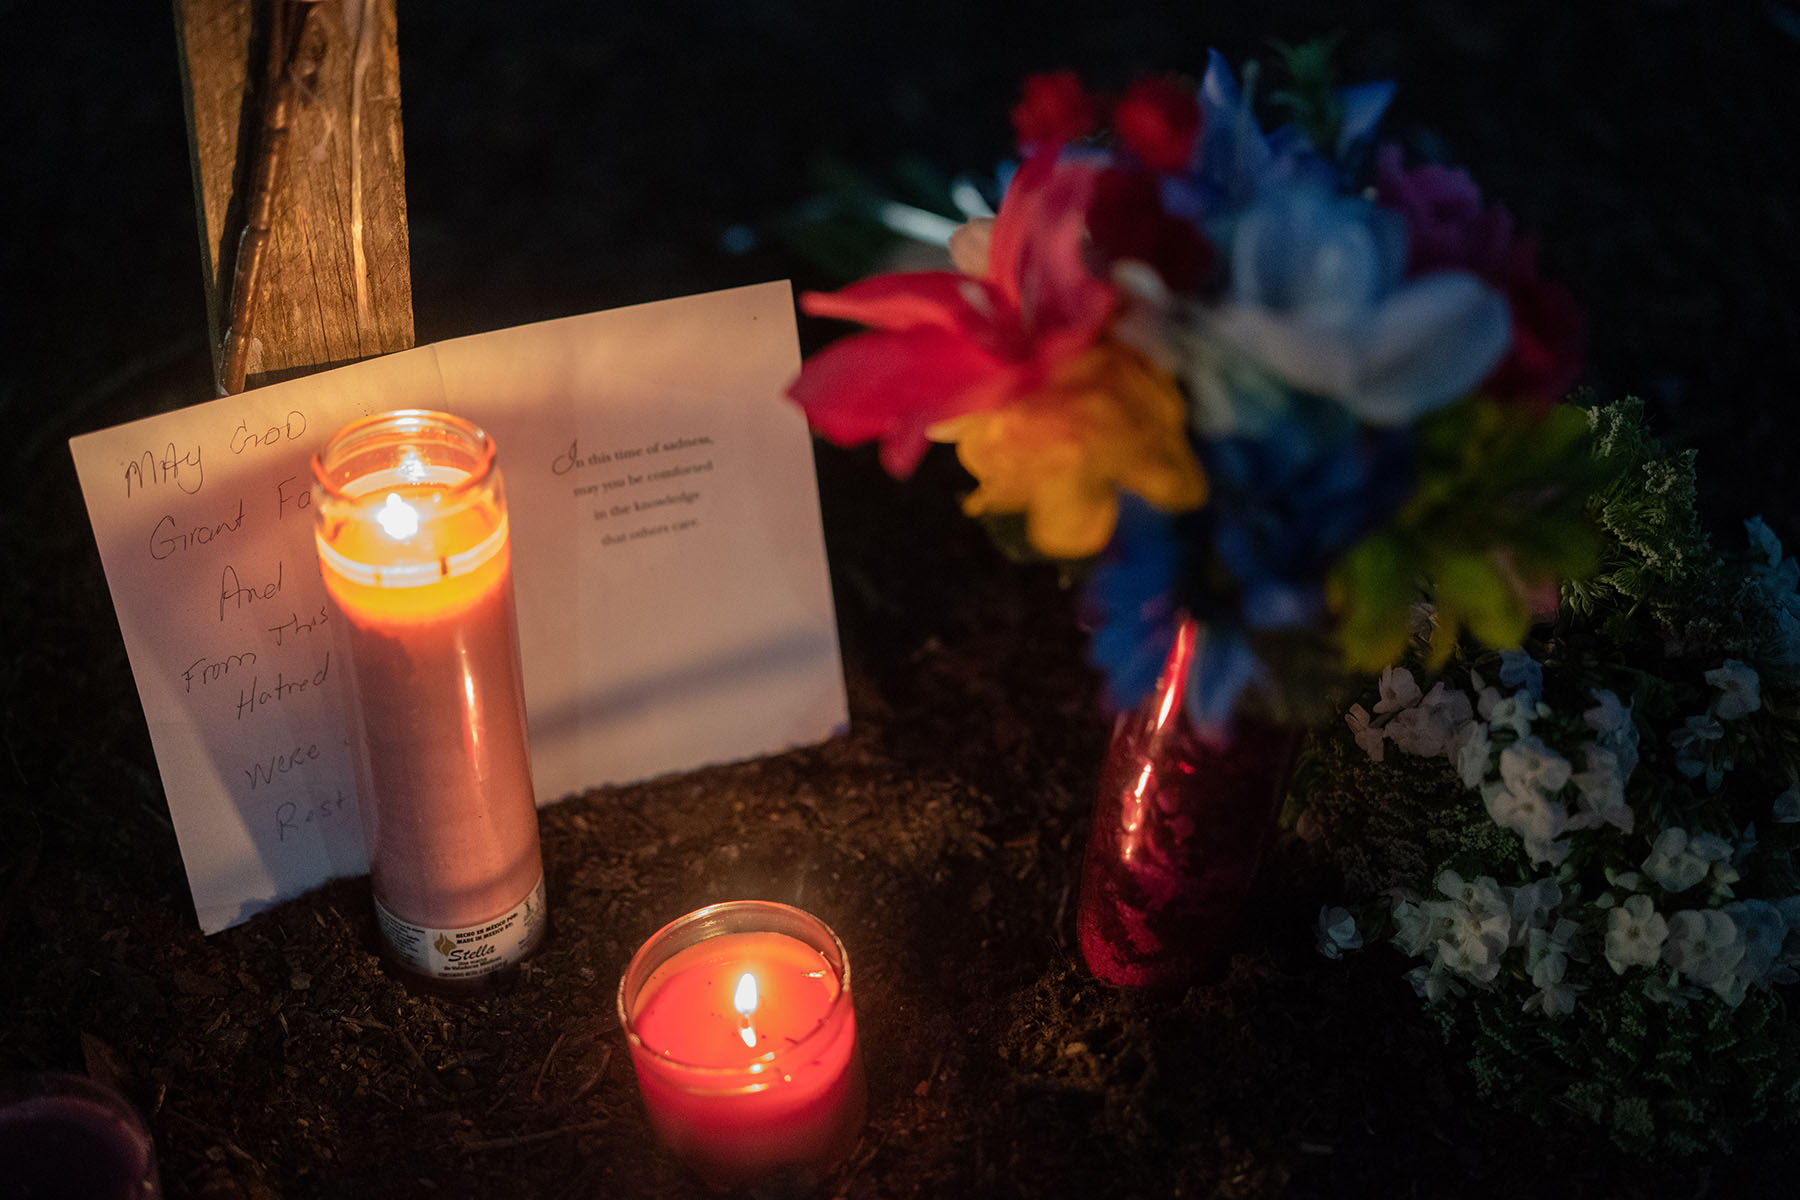 A candle burns at a memorial for Anolt Joseph Laguerre Jr. near the Dollar General store where he was shot and killed.